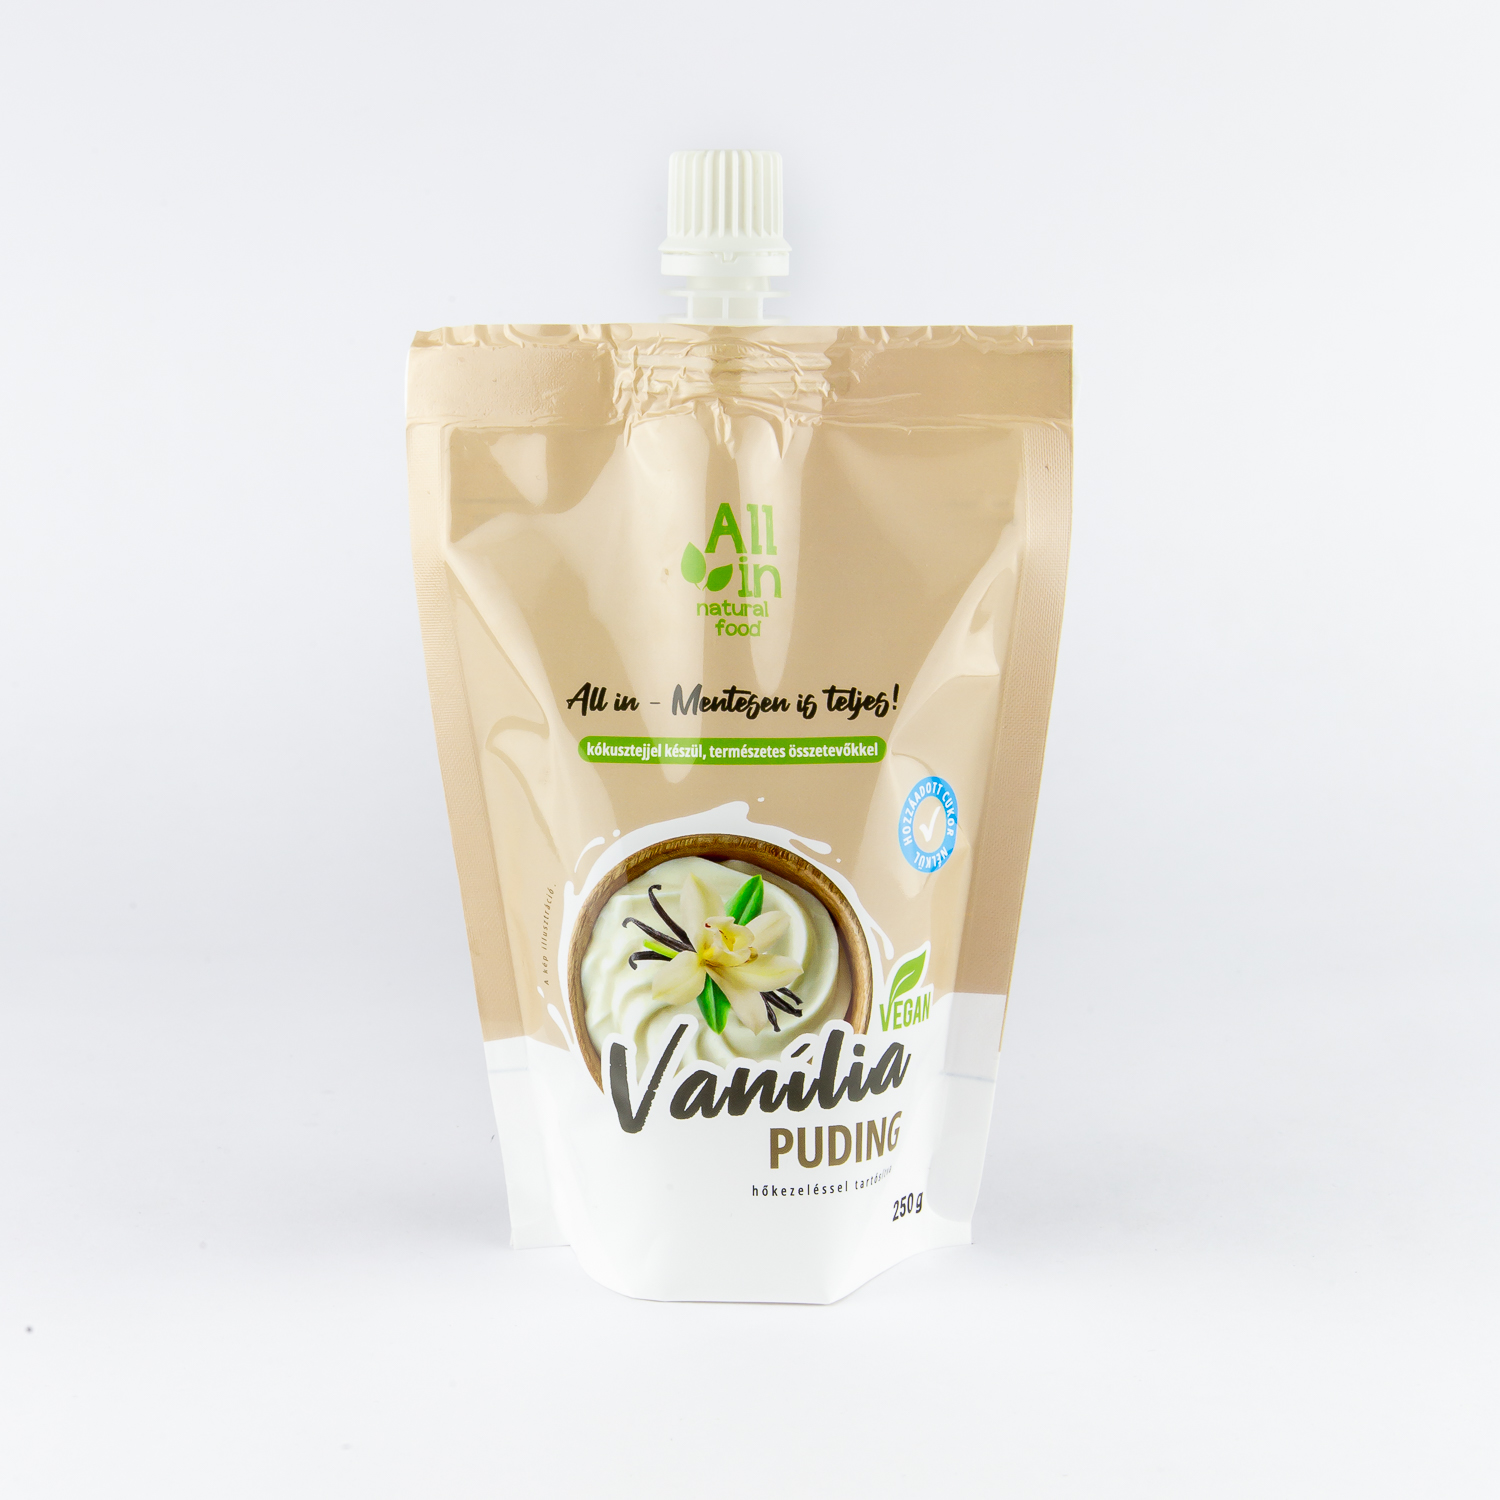 Puding-vanilia-all in natural food